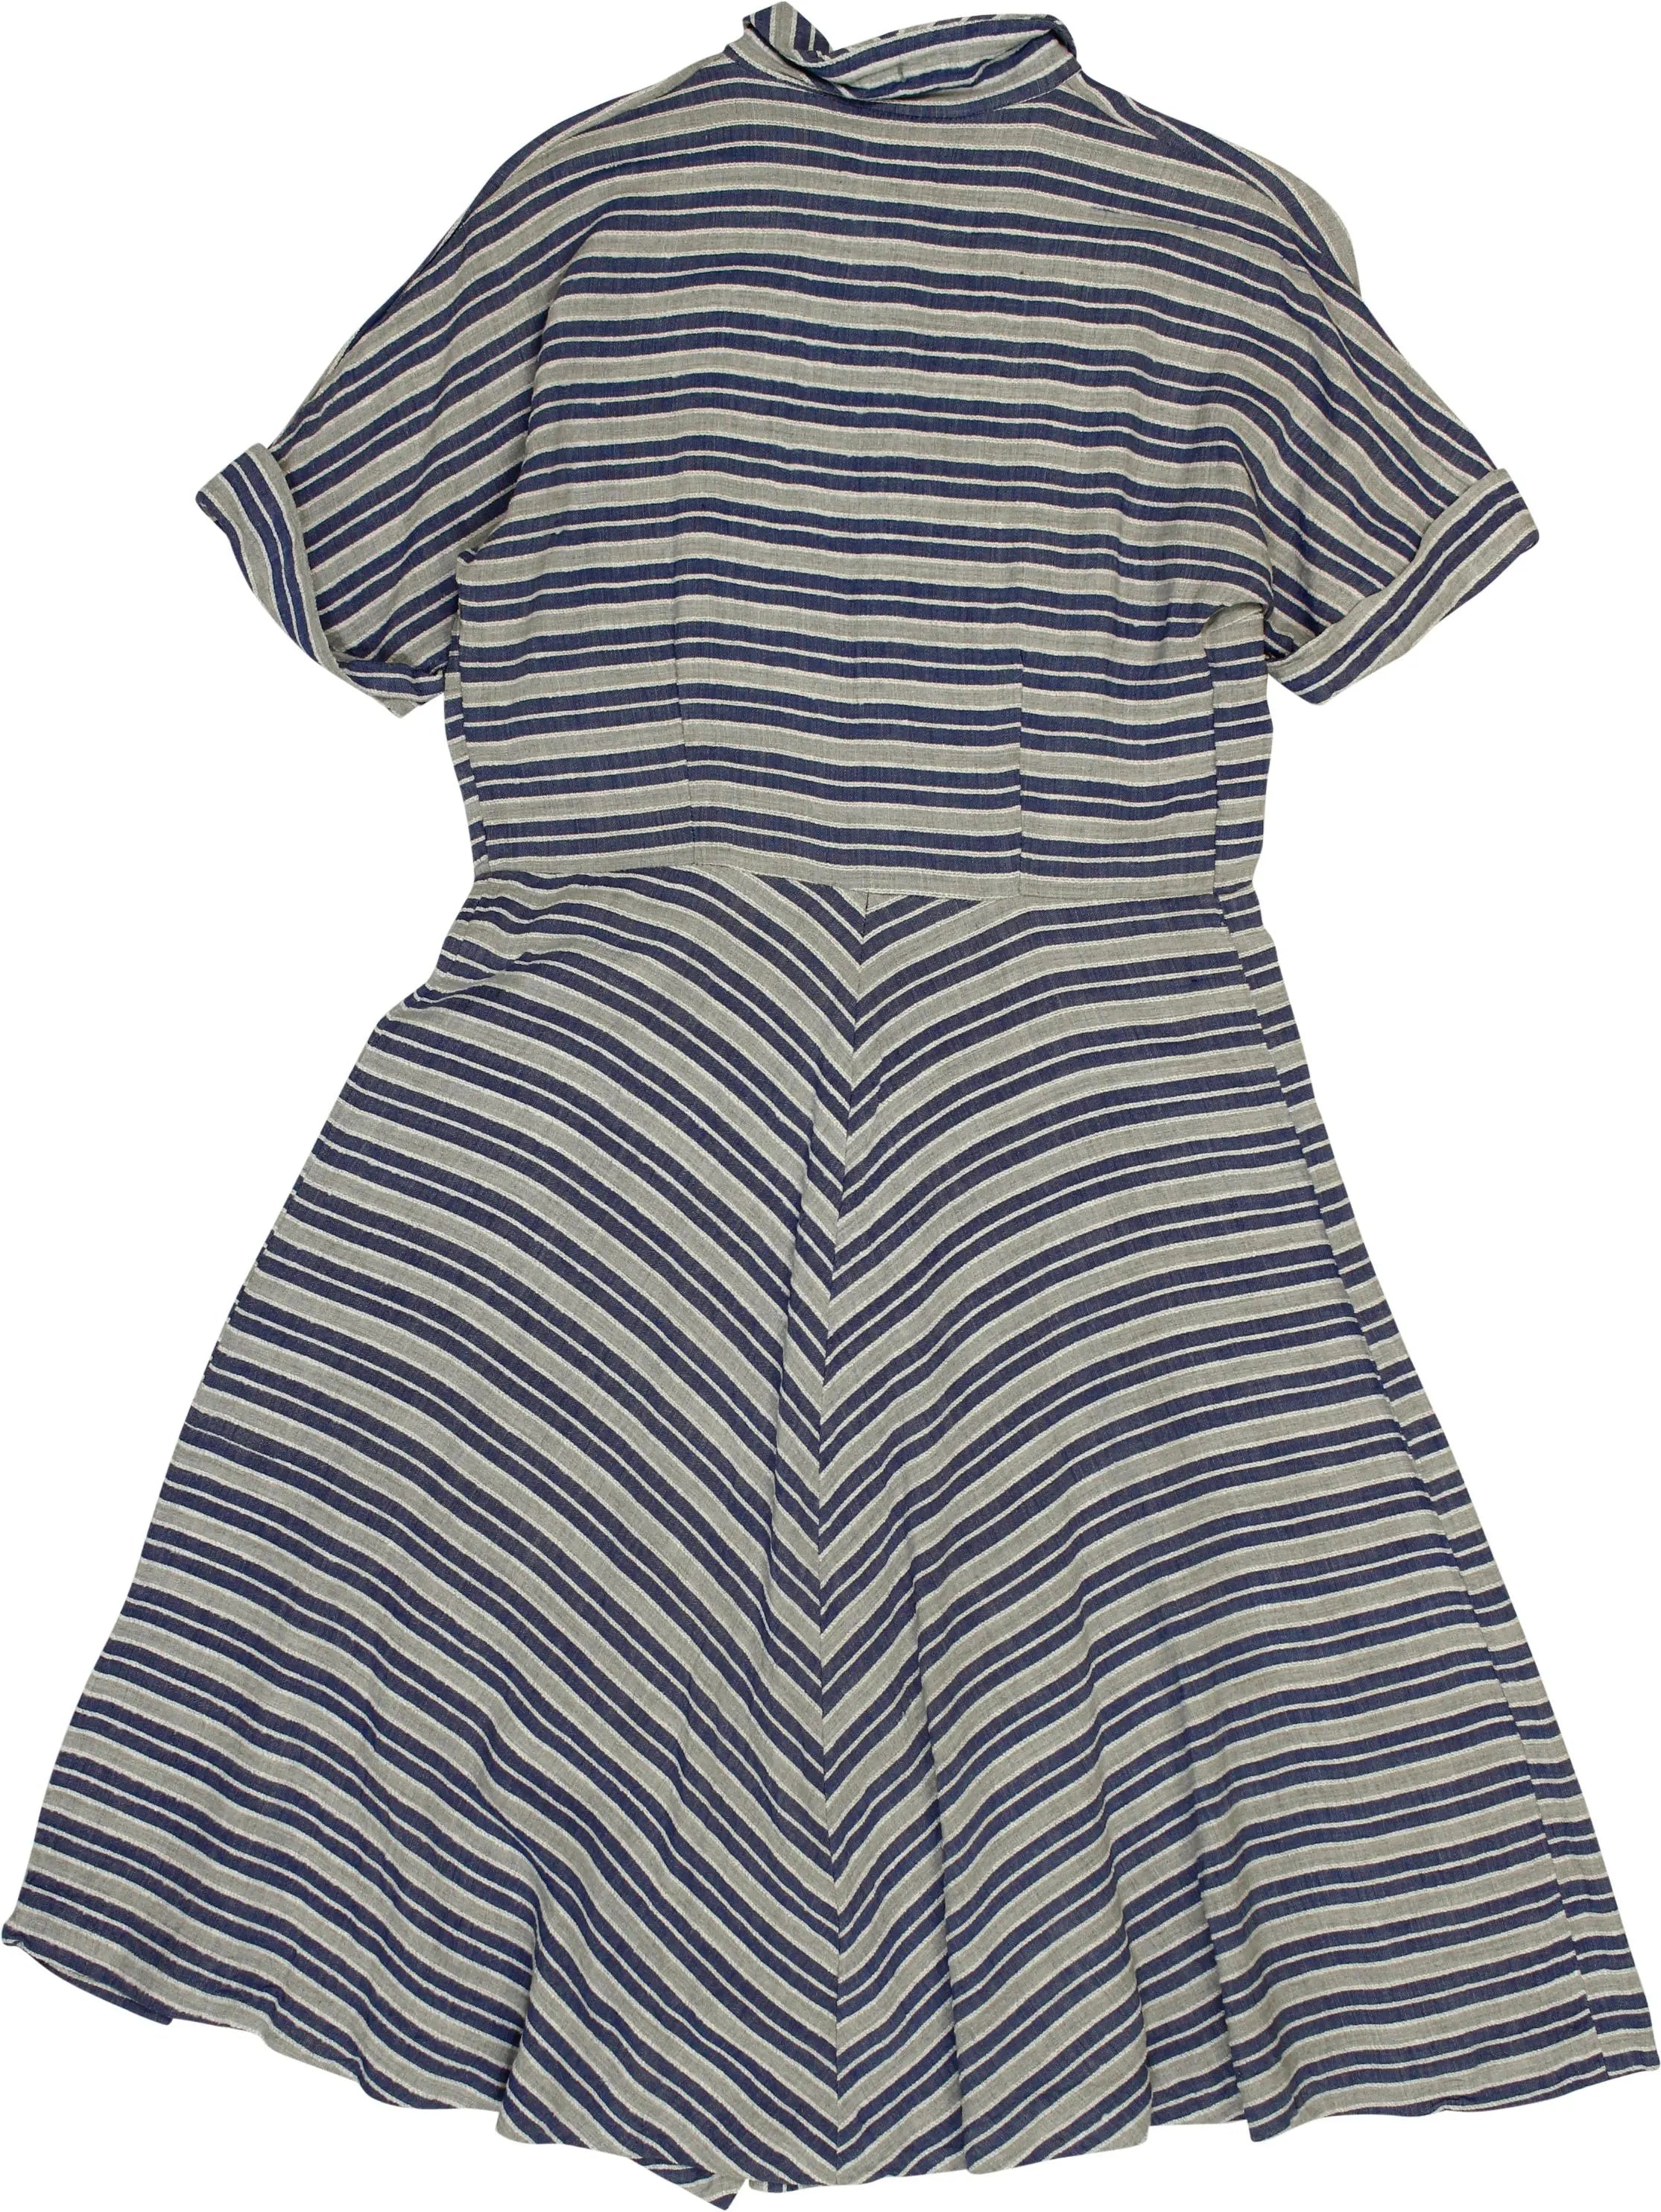 Unknown - Striped Dress- ThriftTale.com - Vintage and second handclothing